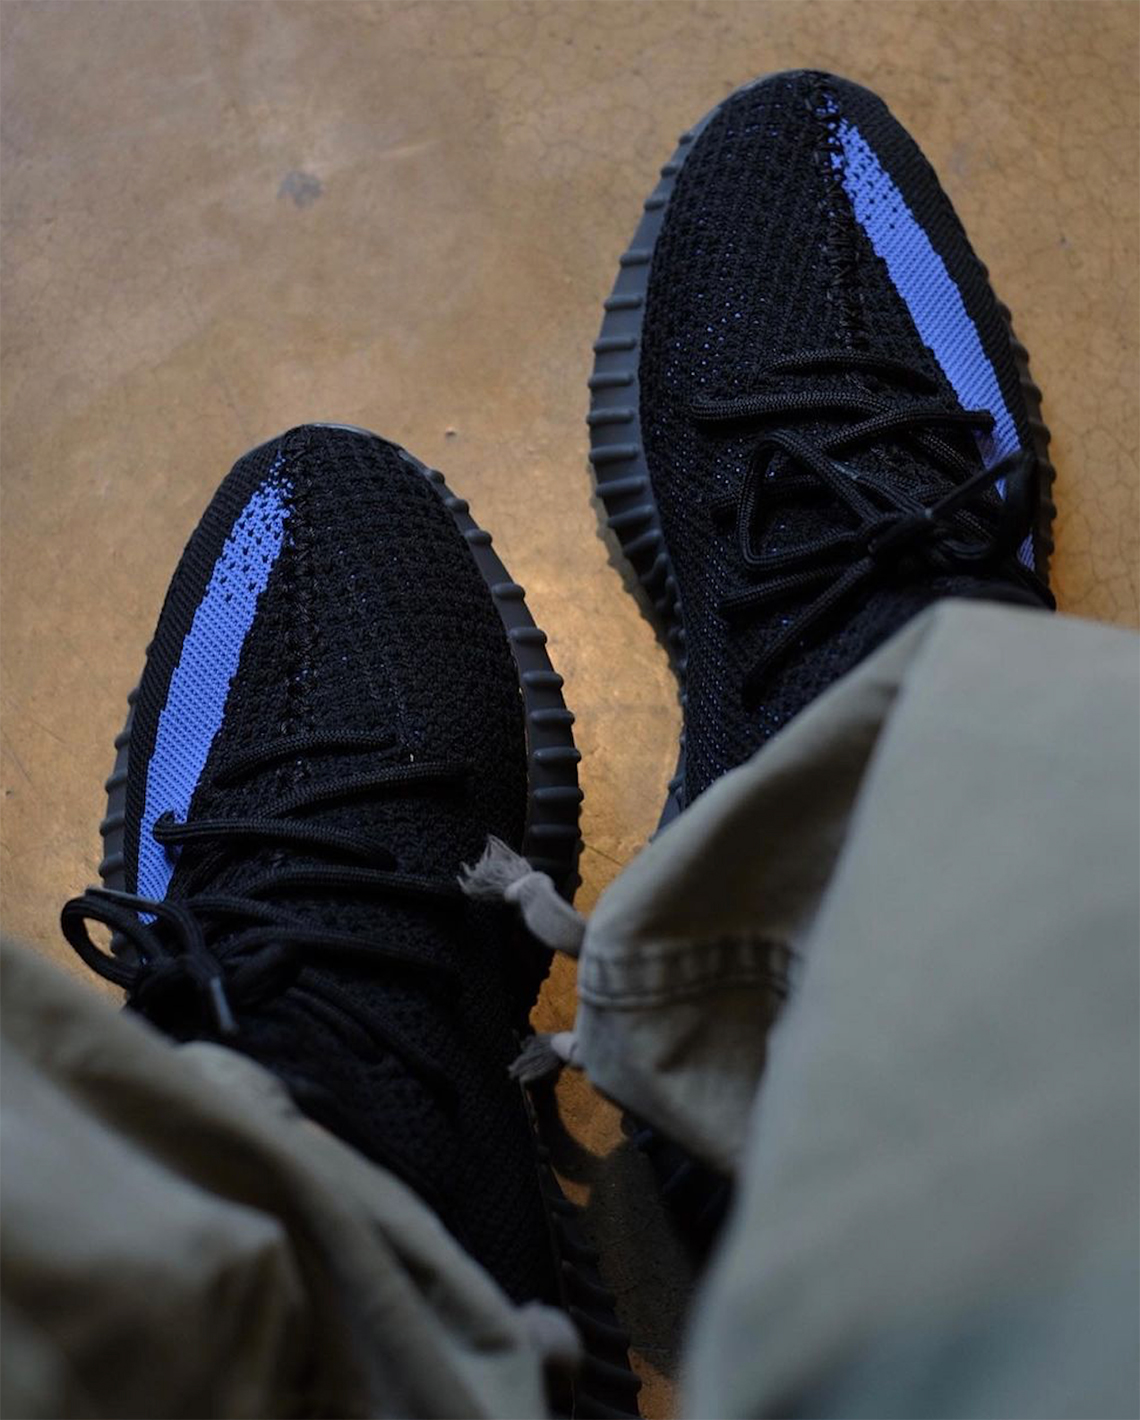 adidas japan Yeezy Boost 350 V2 Dazzling Blue Gy7164 Store List 5